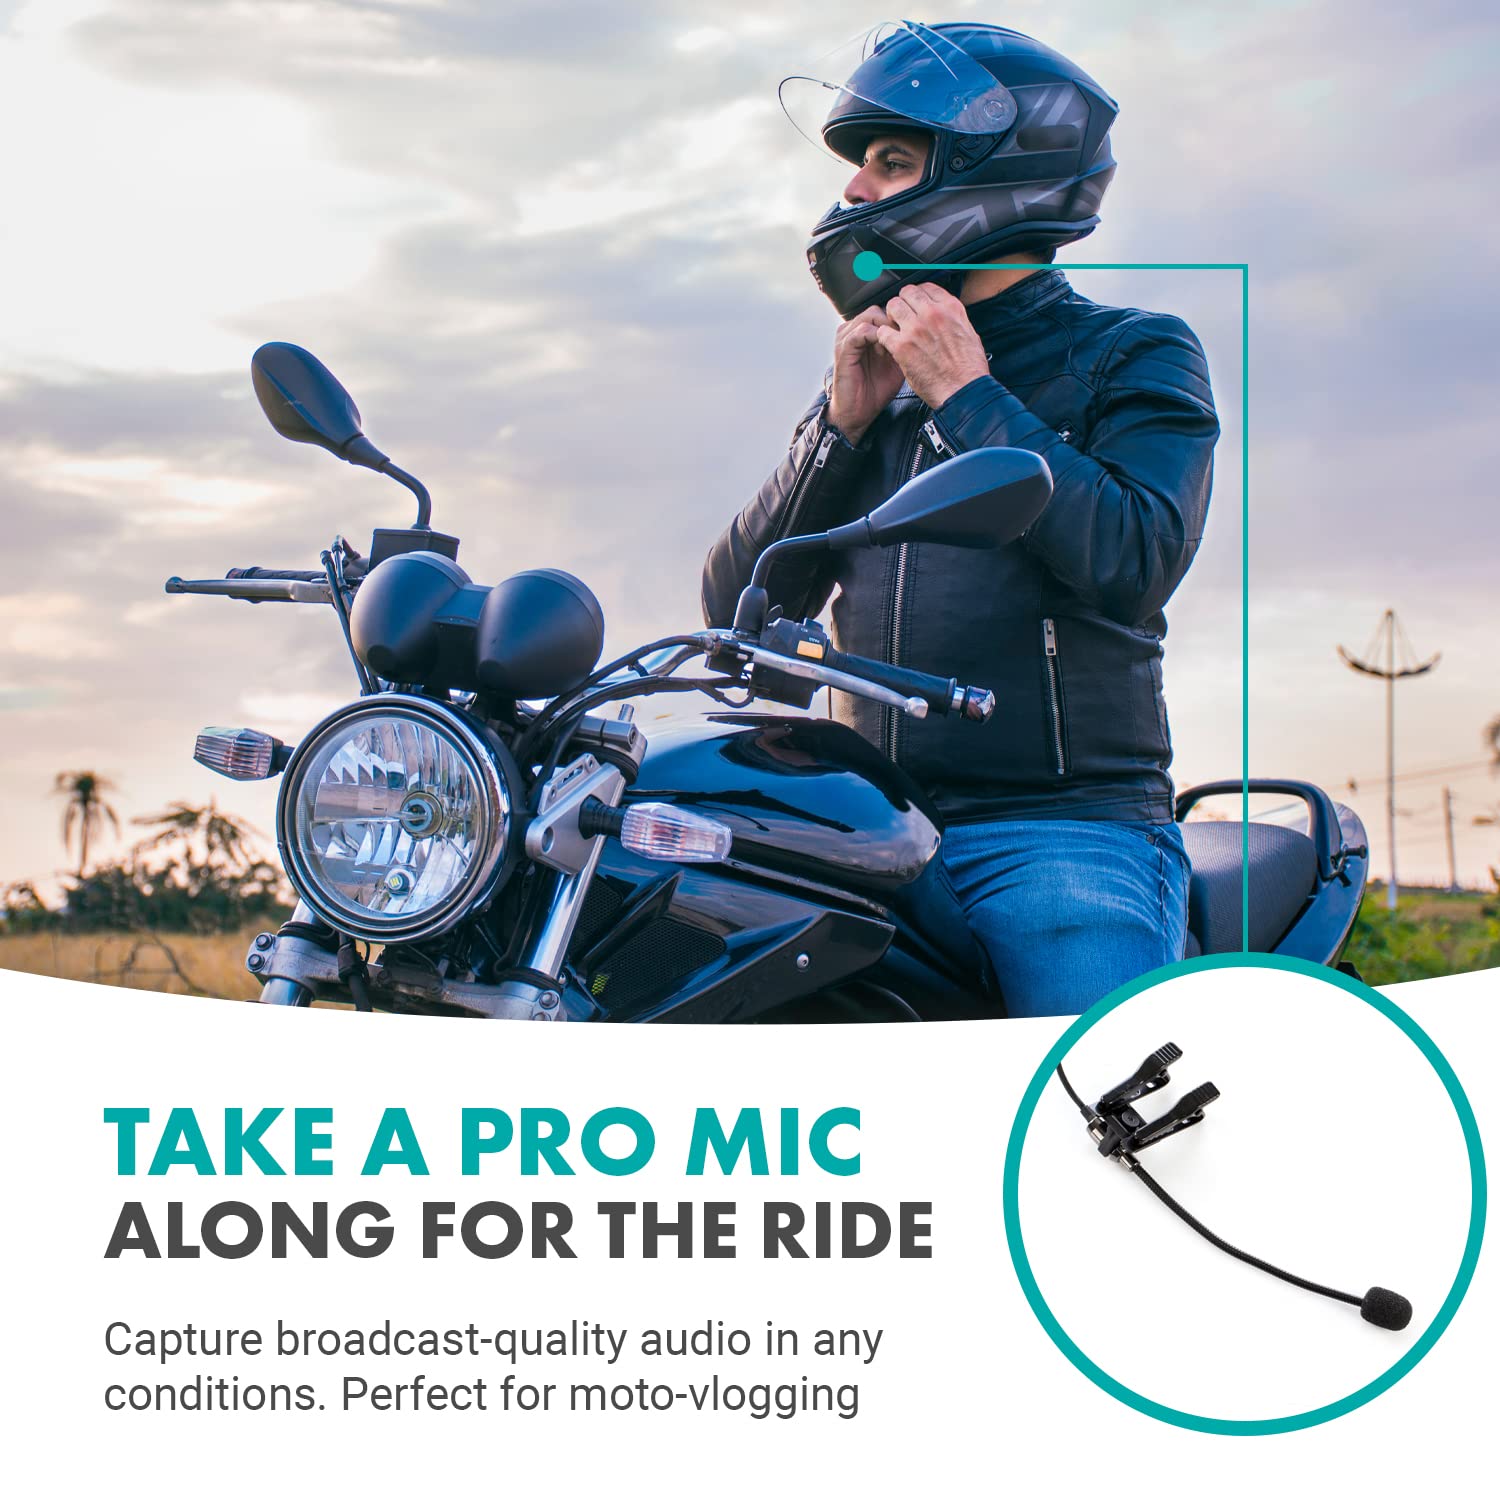 Movo ACM400 Flexible Gooseneck Omnidirectional Microphone for Motovlogging Moto Vlog Action Cam Helmet Mic - Clip on Microphone for Motorcycle Vloggers - Compatible with GoPro Media Mod  - Very Good